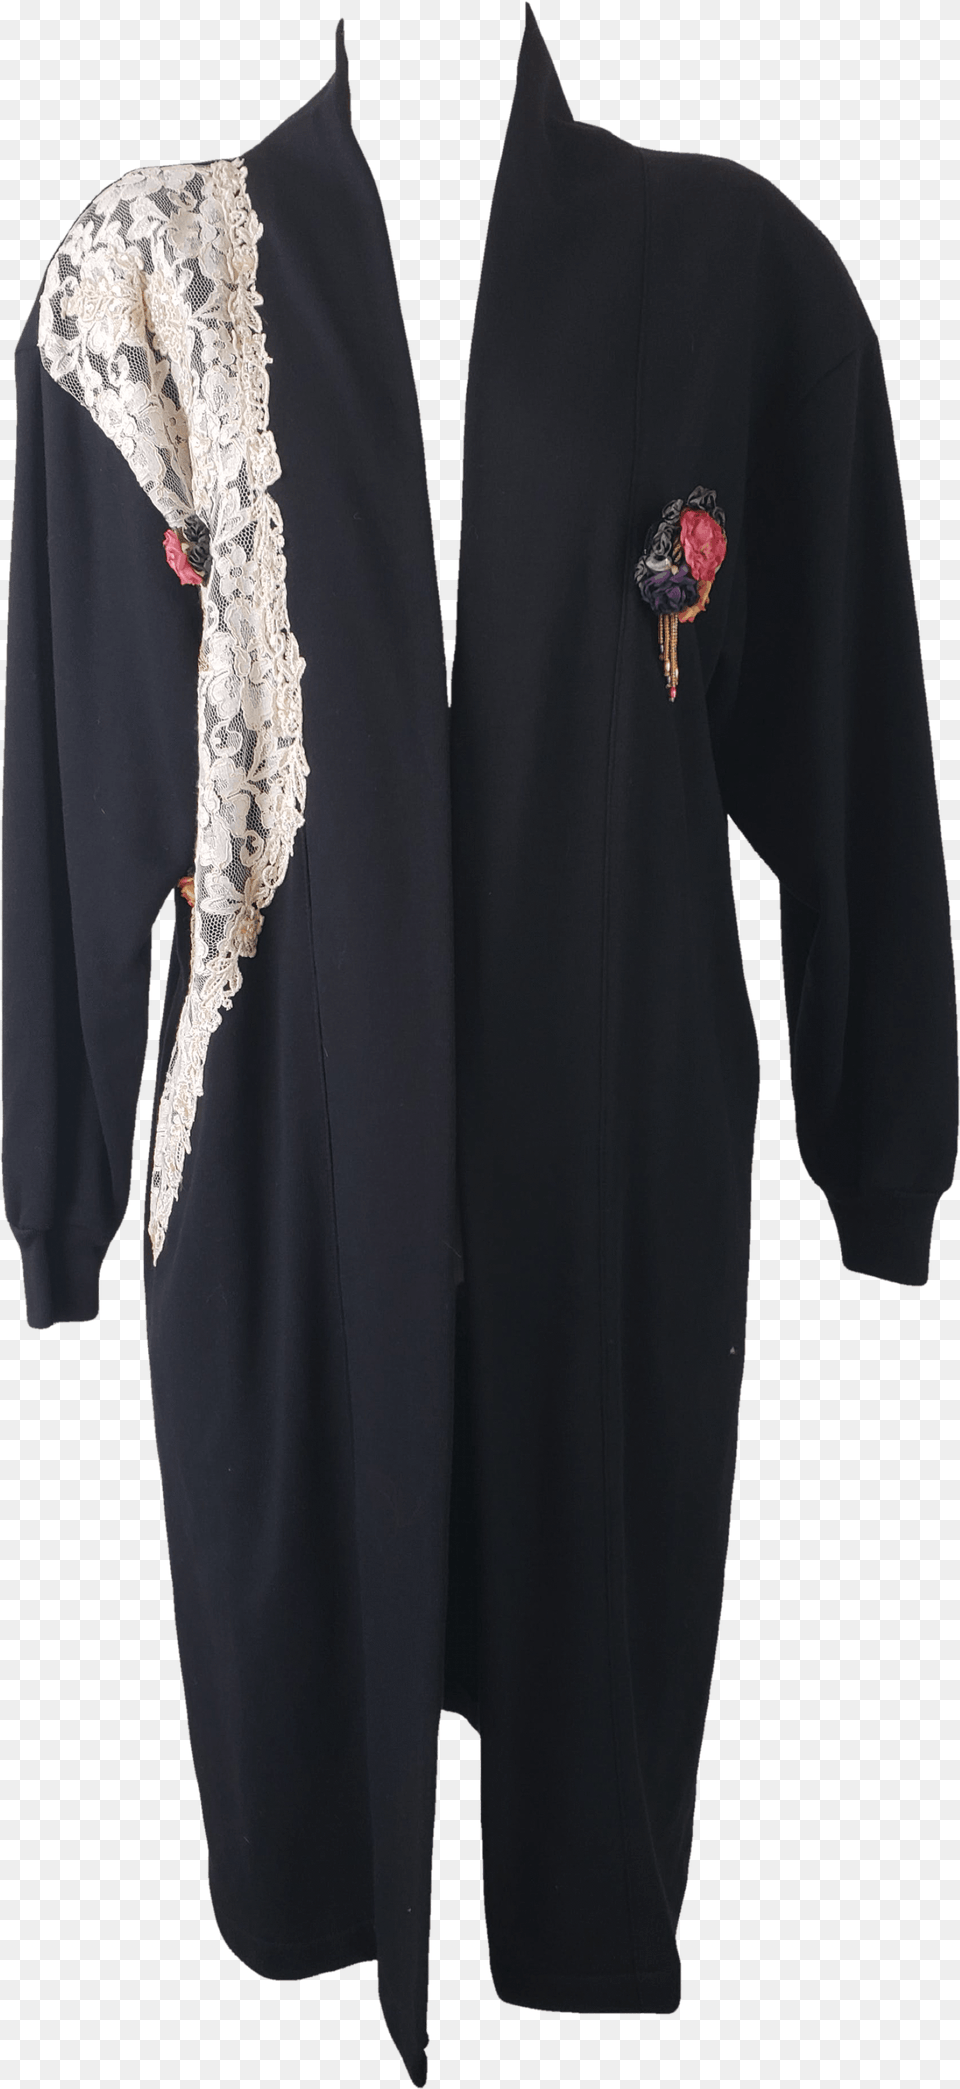 S Long Open Cardigan With Lace Detailing With Flower Costume, Clothing, Fashion, Long Sleeve, Robe Png